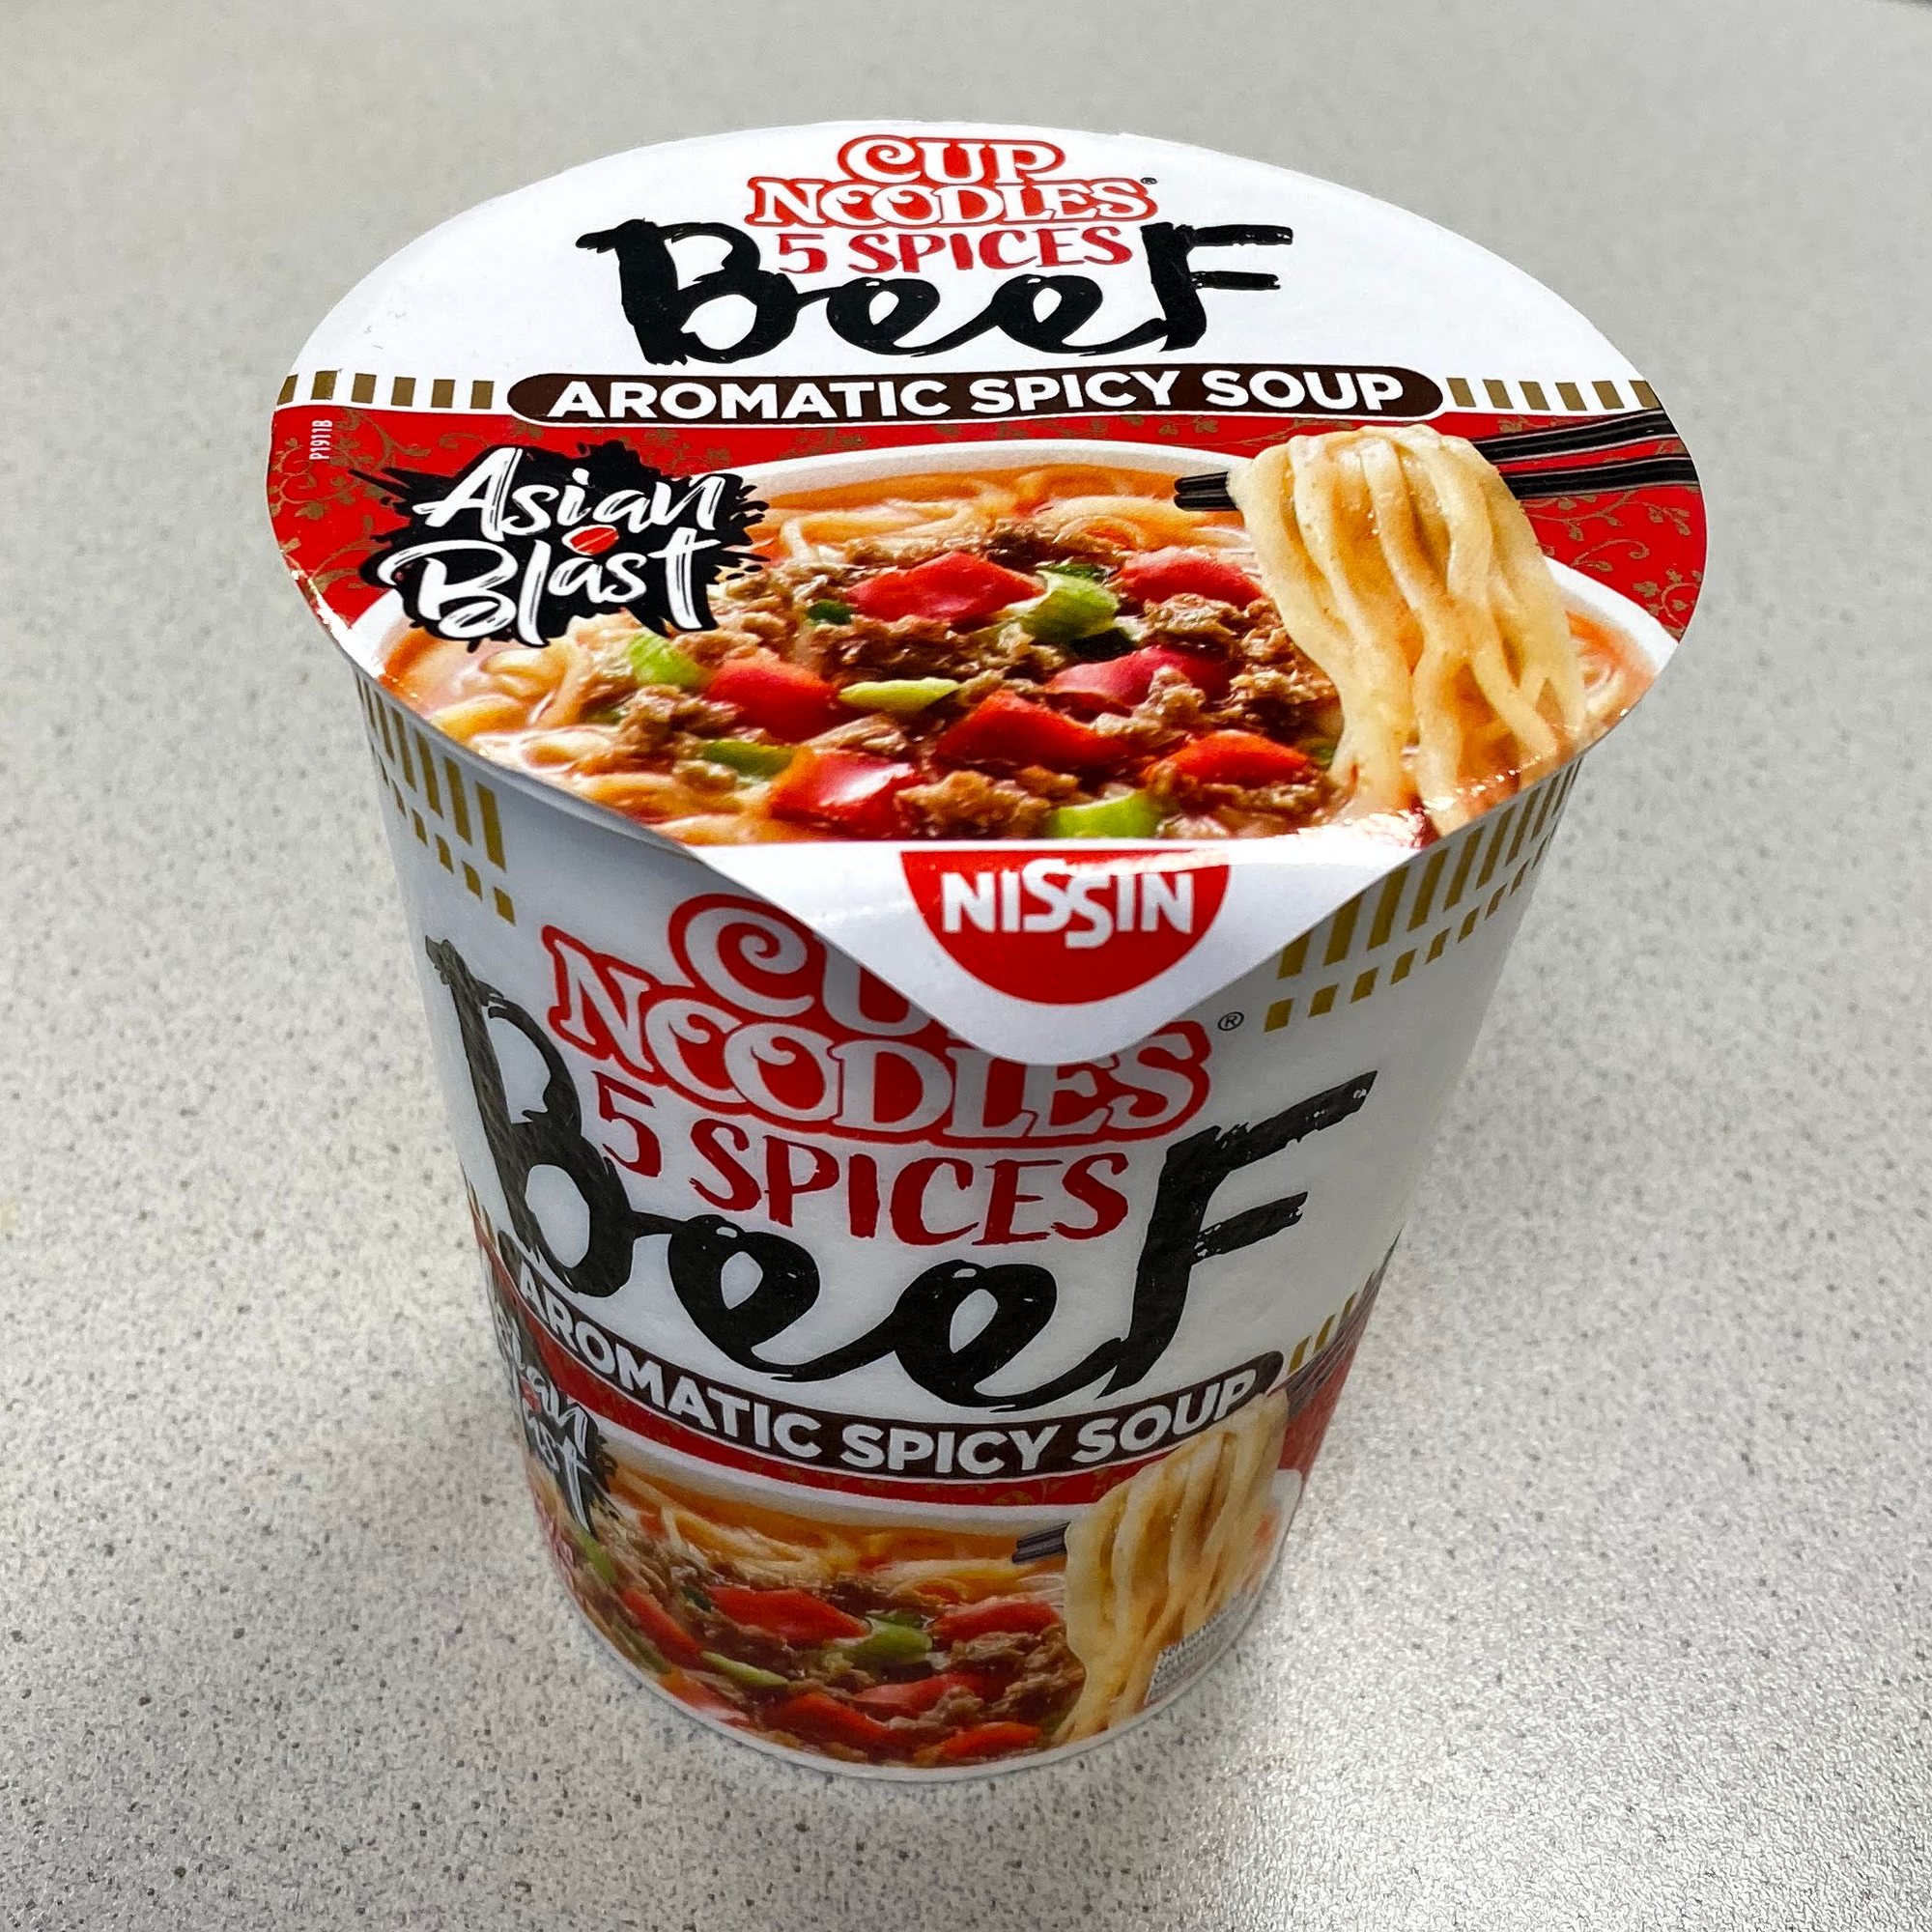 #1755: Nissin Cup Noodles „5 Spices Beef“ (Aromatic Spicy Soup) (Update